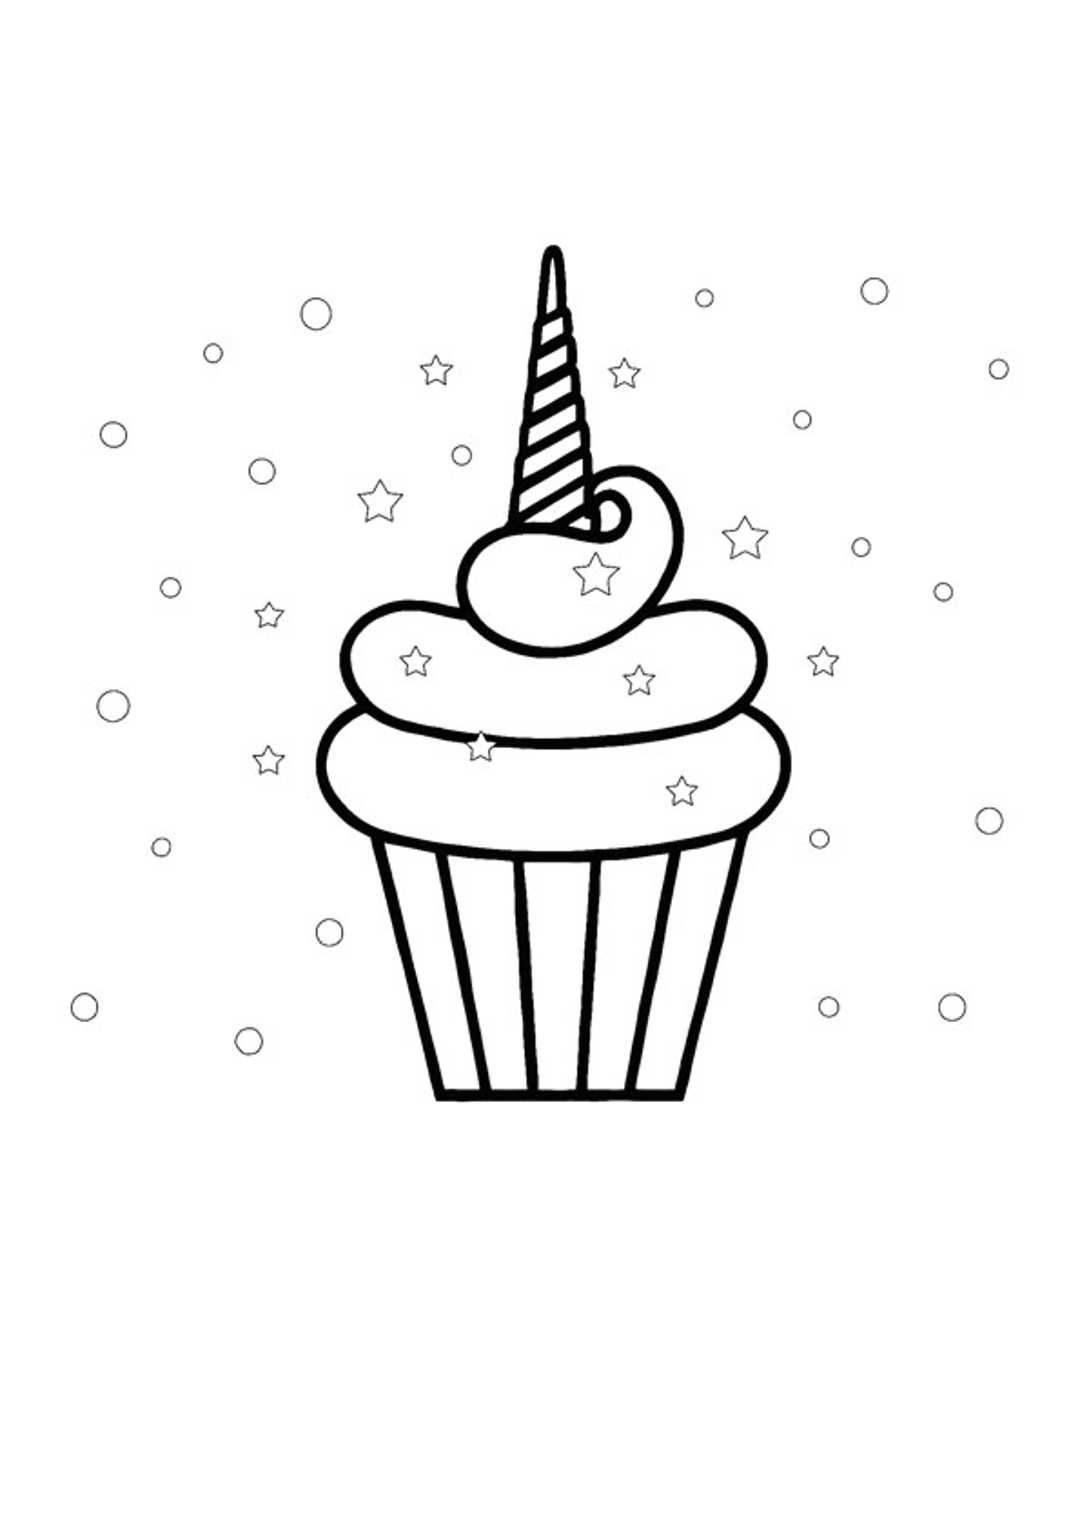 Unicorn cake coloring pages unicorn coloring pages cupcake coloring pages coloring pages